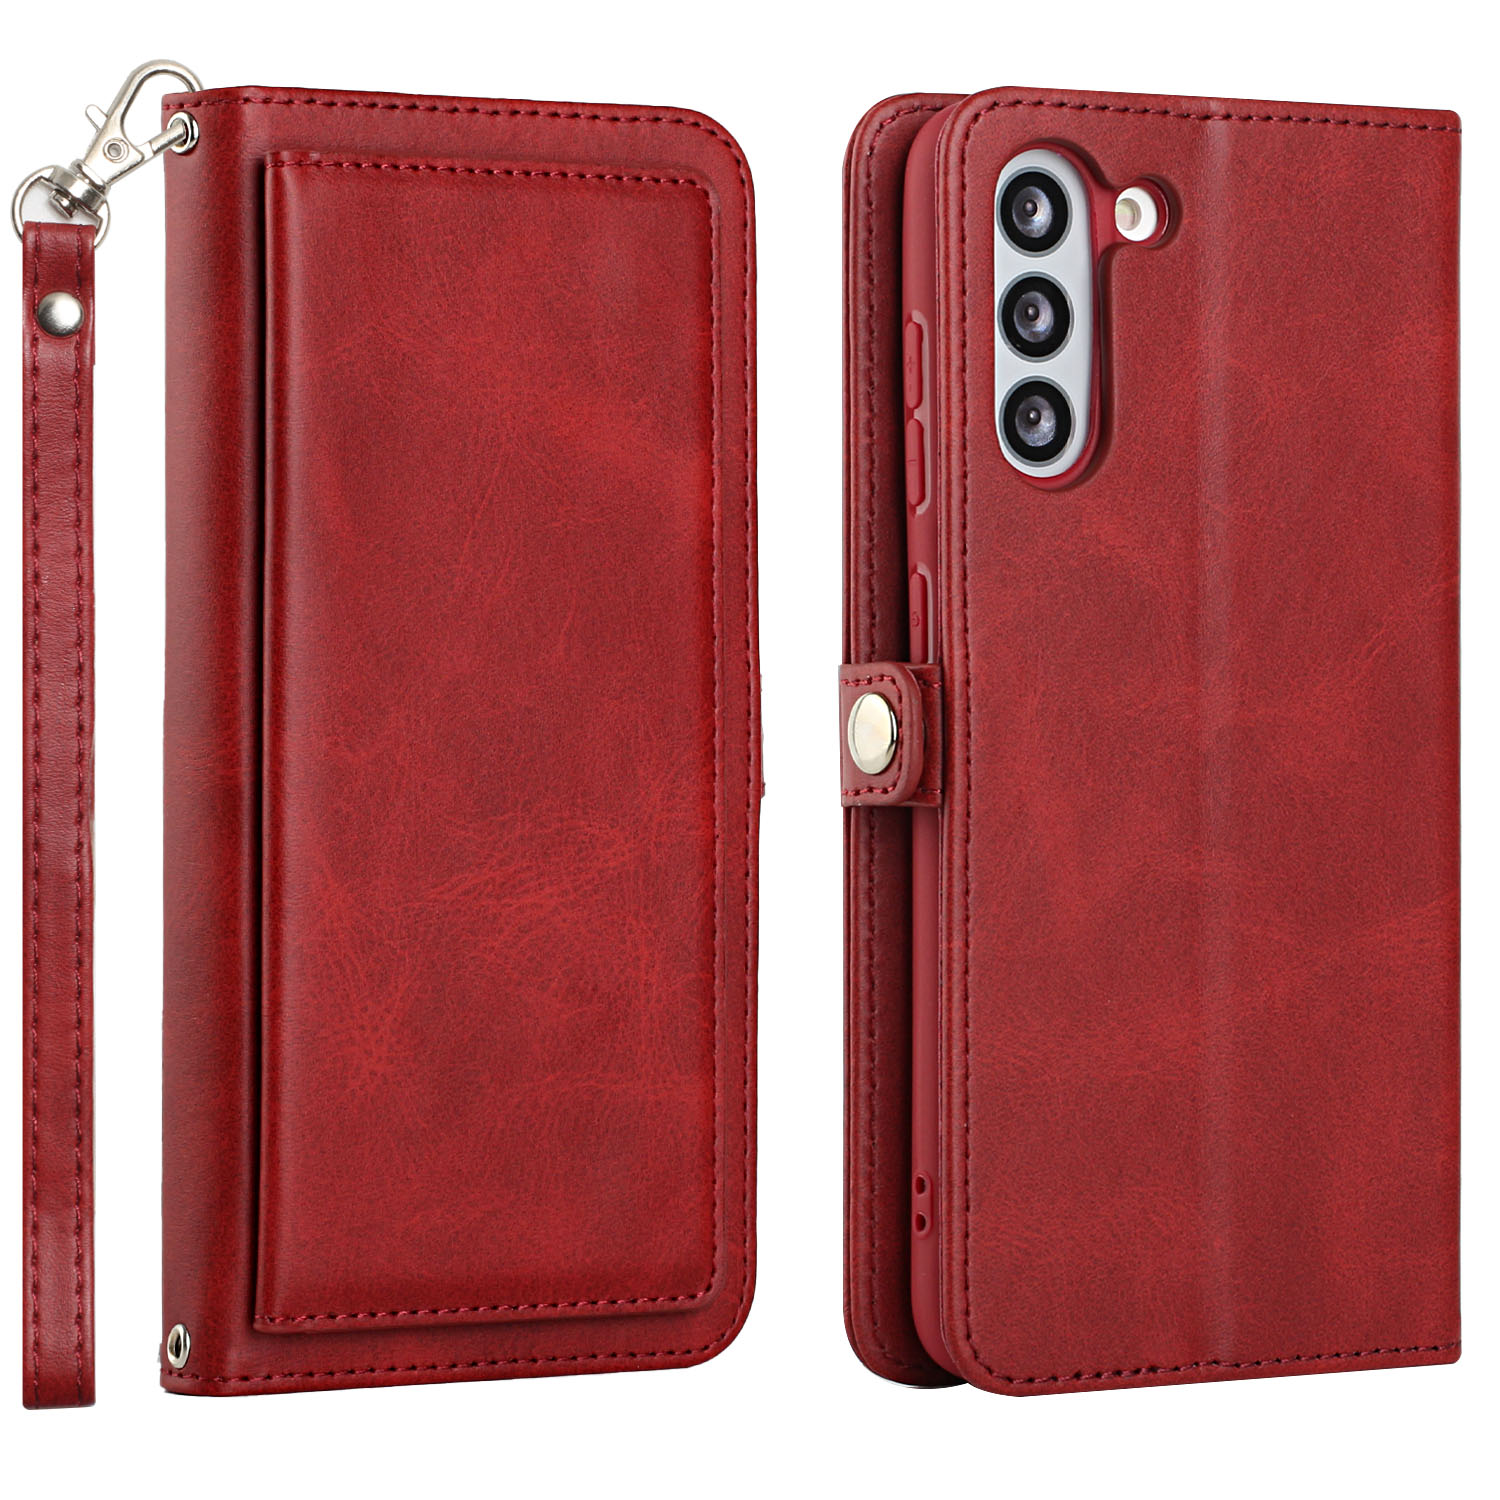 Premium PU Leather Folio WALLET Front Cover Case for Galaxy S21 FE (Red)